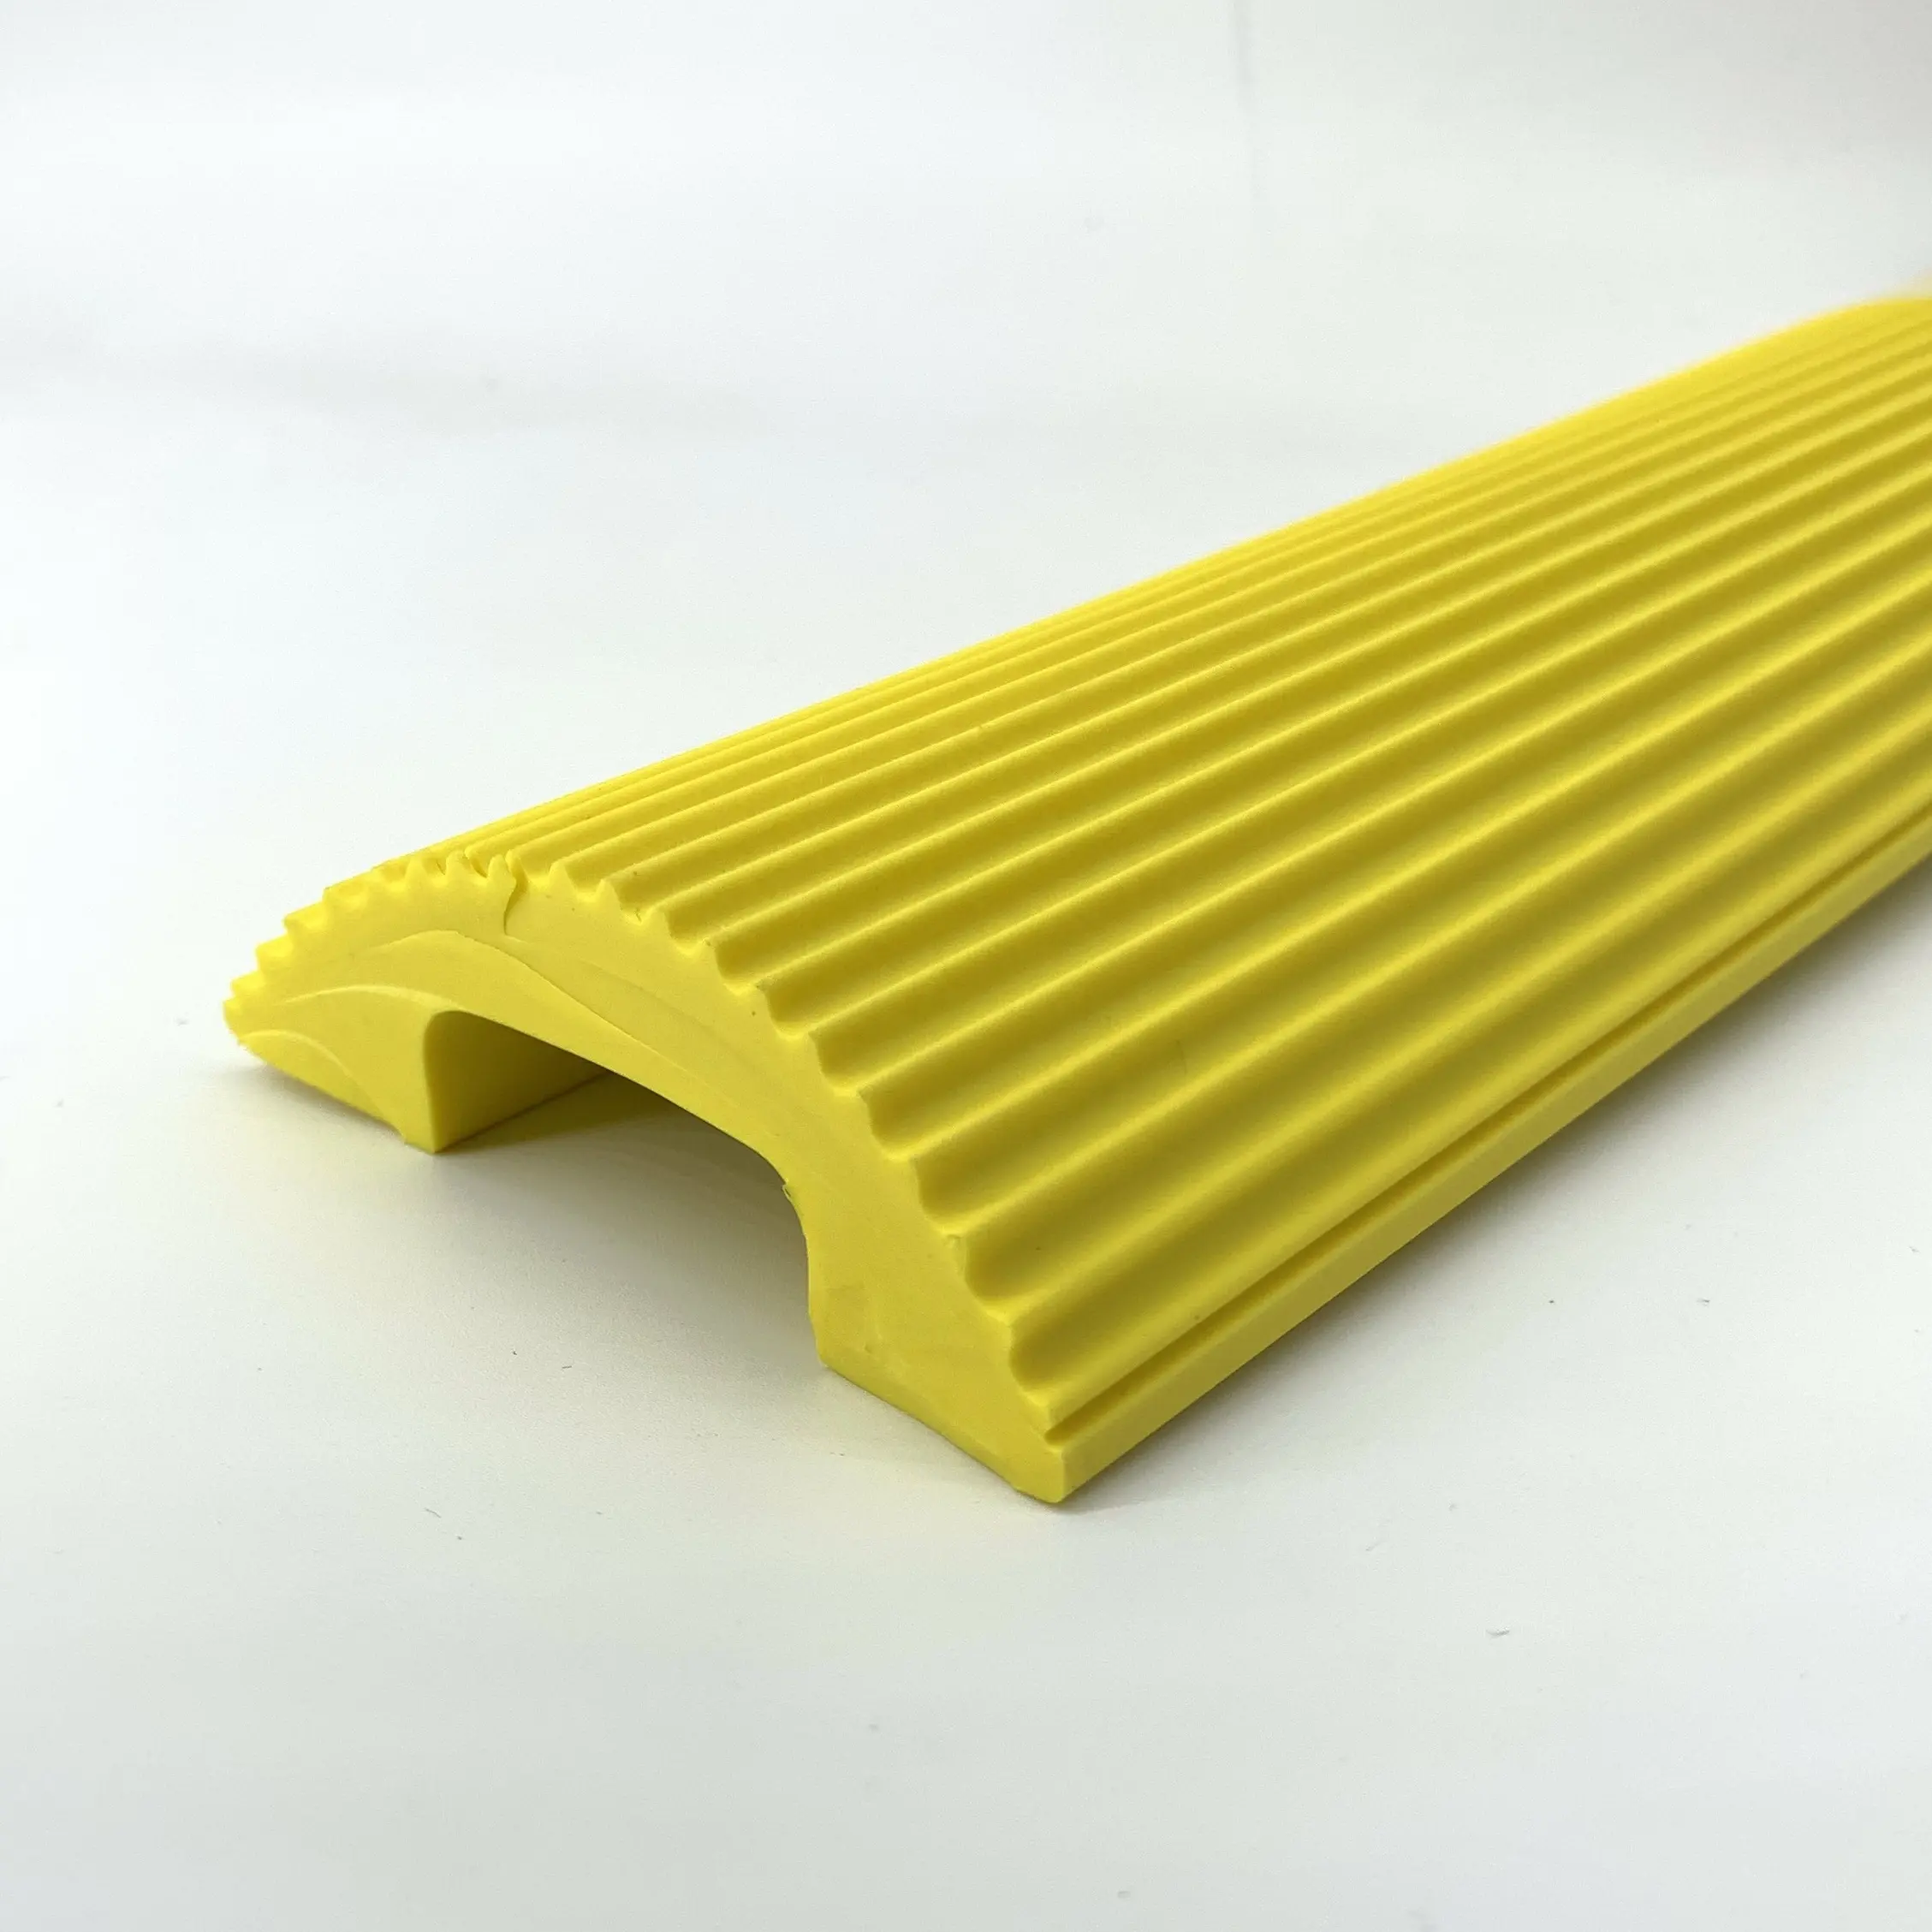 Supply safety rubber bumper protector stair car door window angle wall decorative plastic corner guards